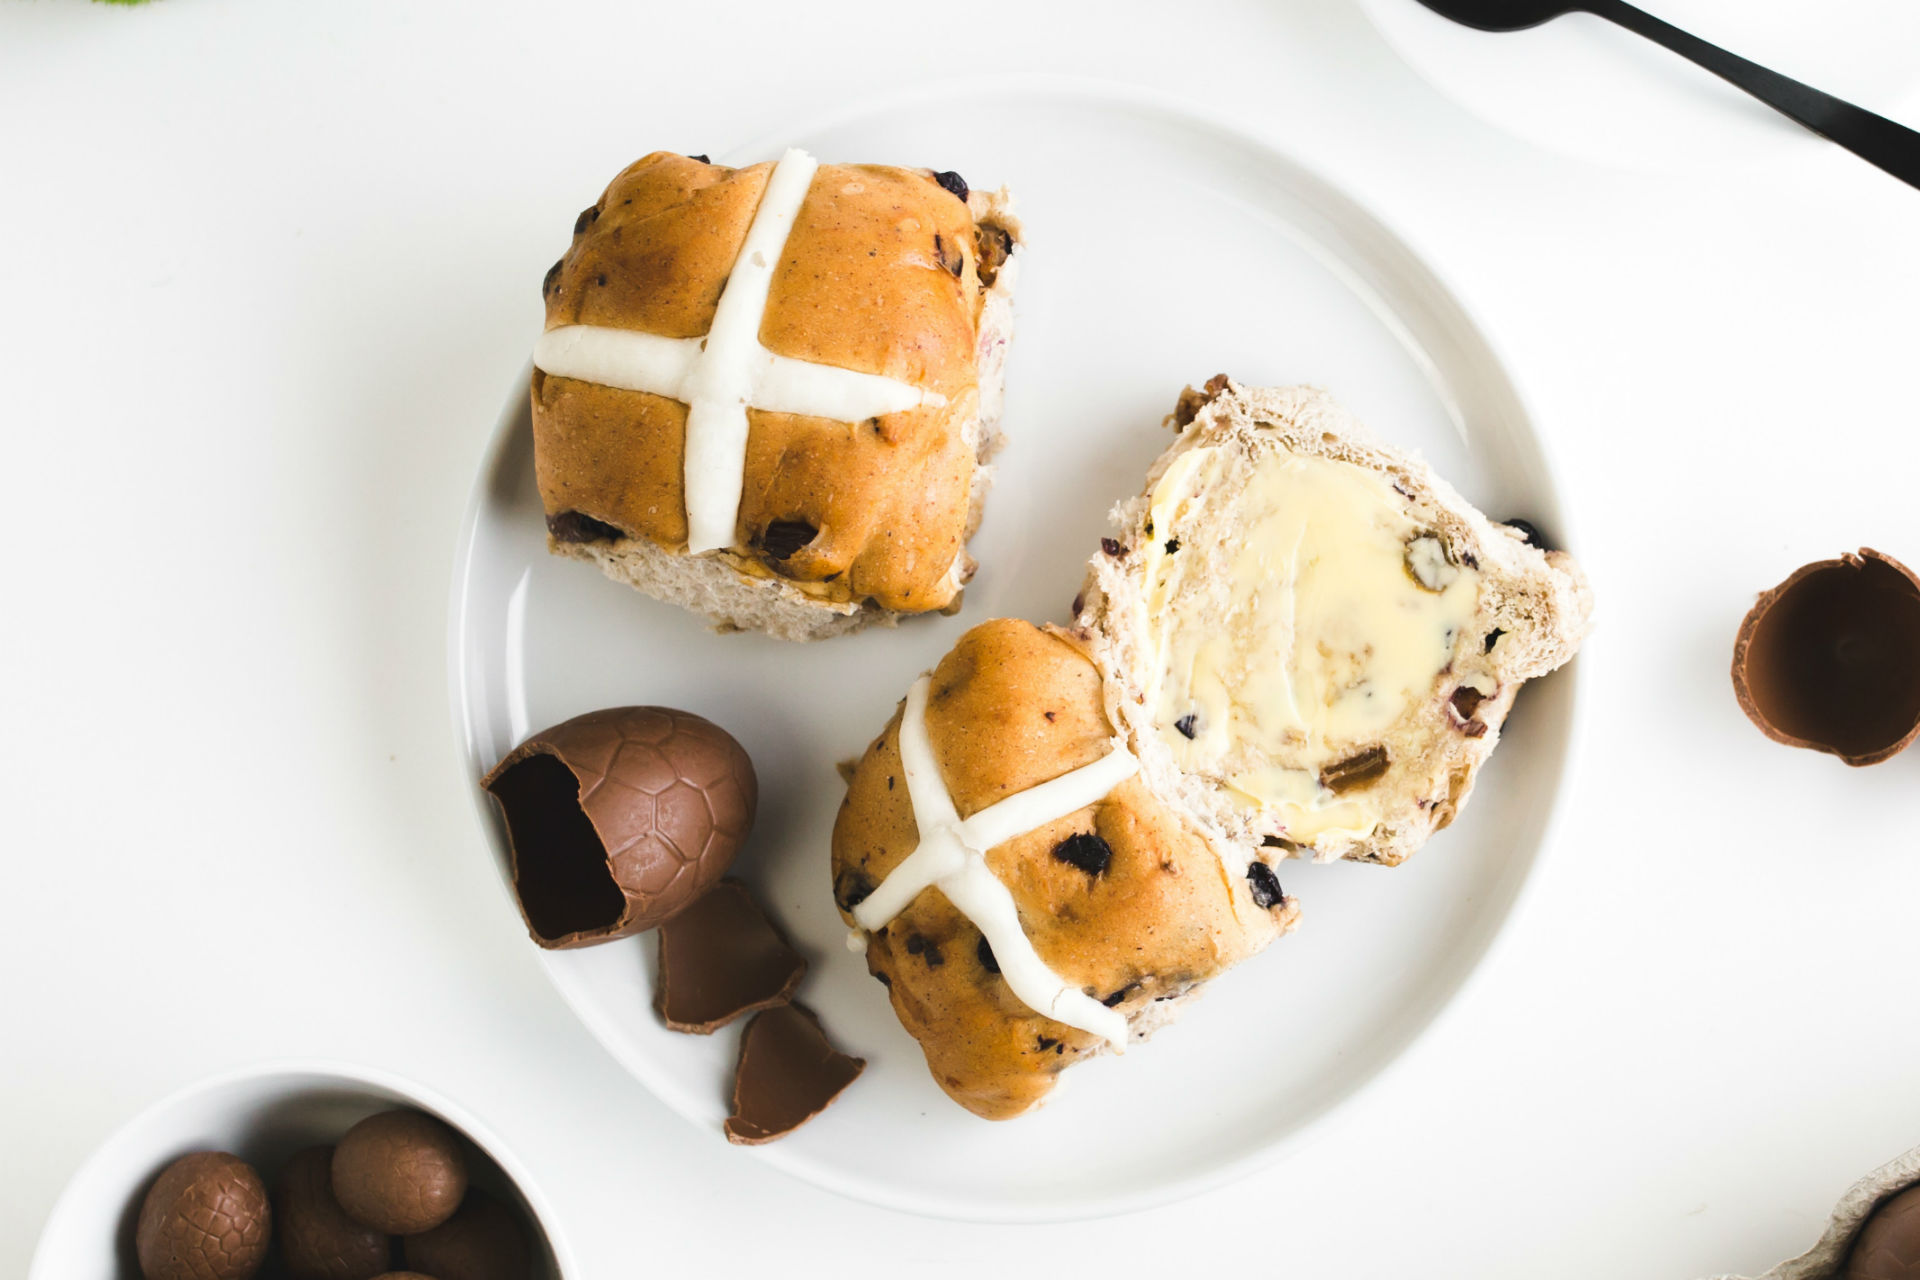 hot cross buns on a plate with chocolate eggs